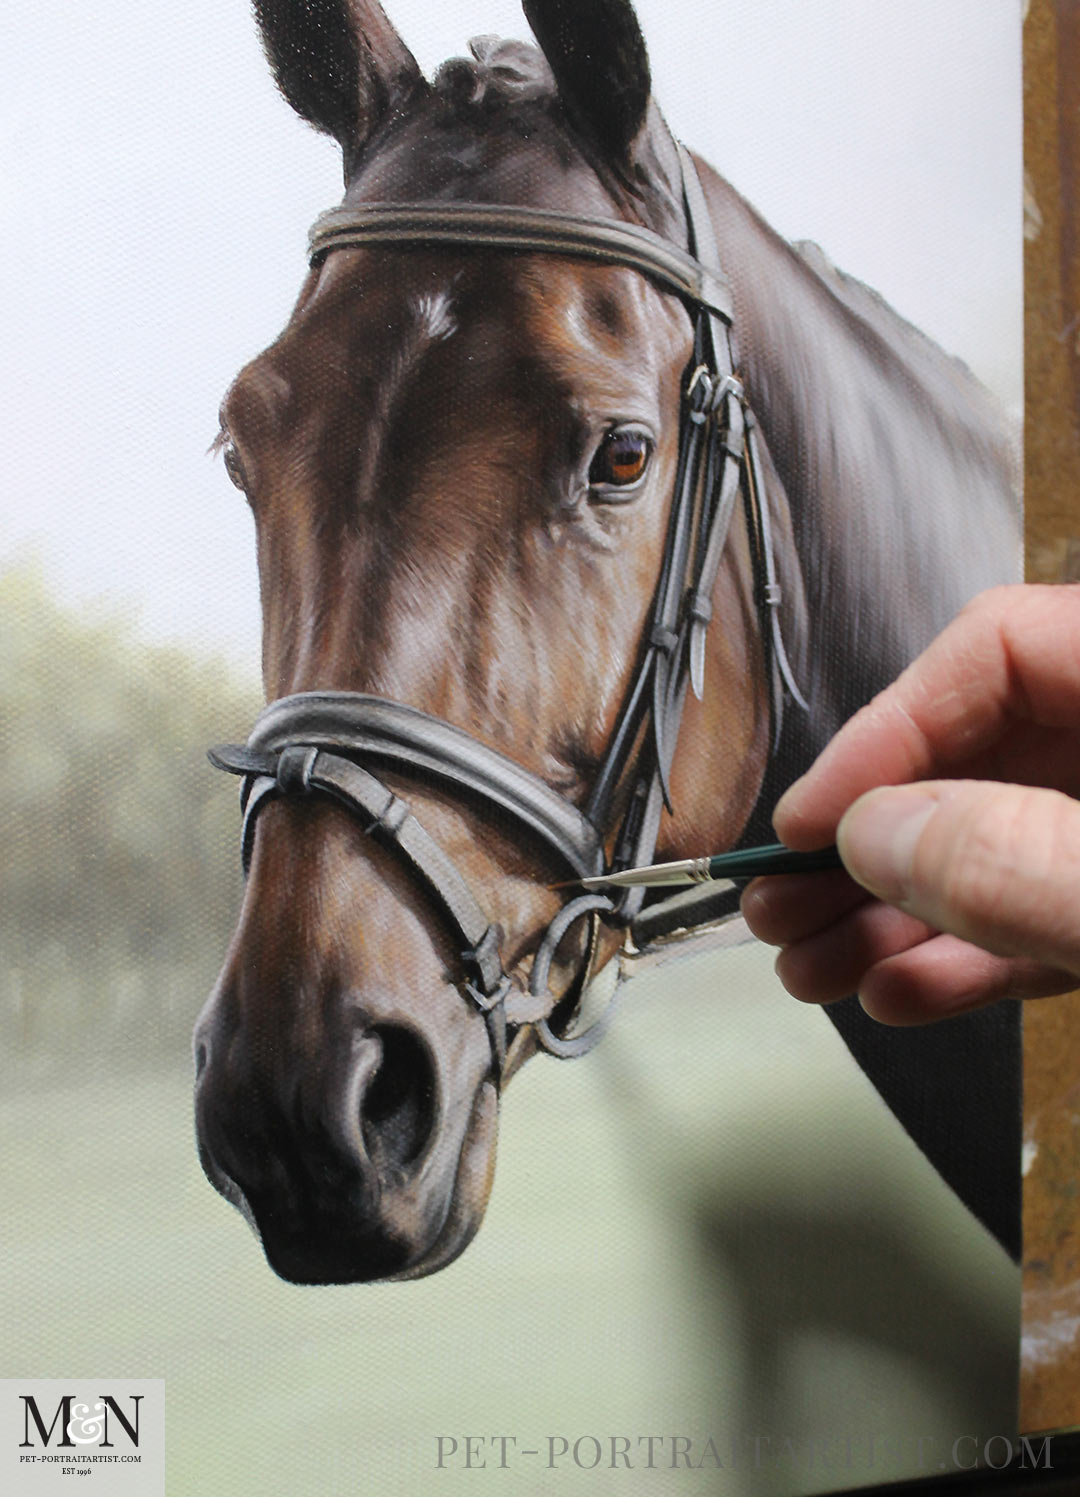 Early stage of the oil painting